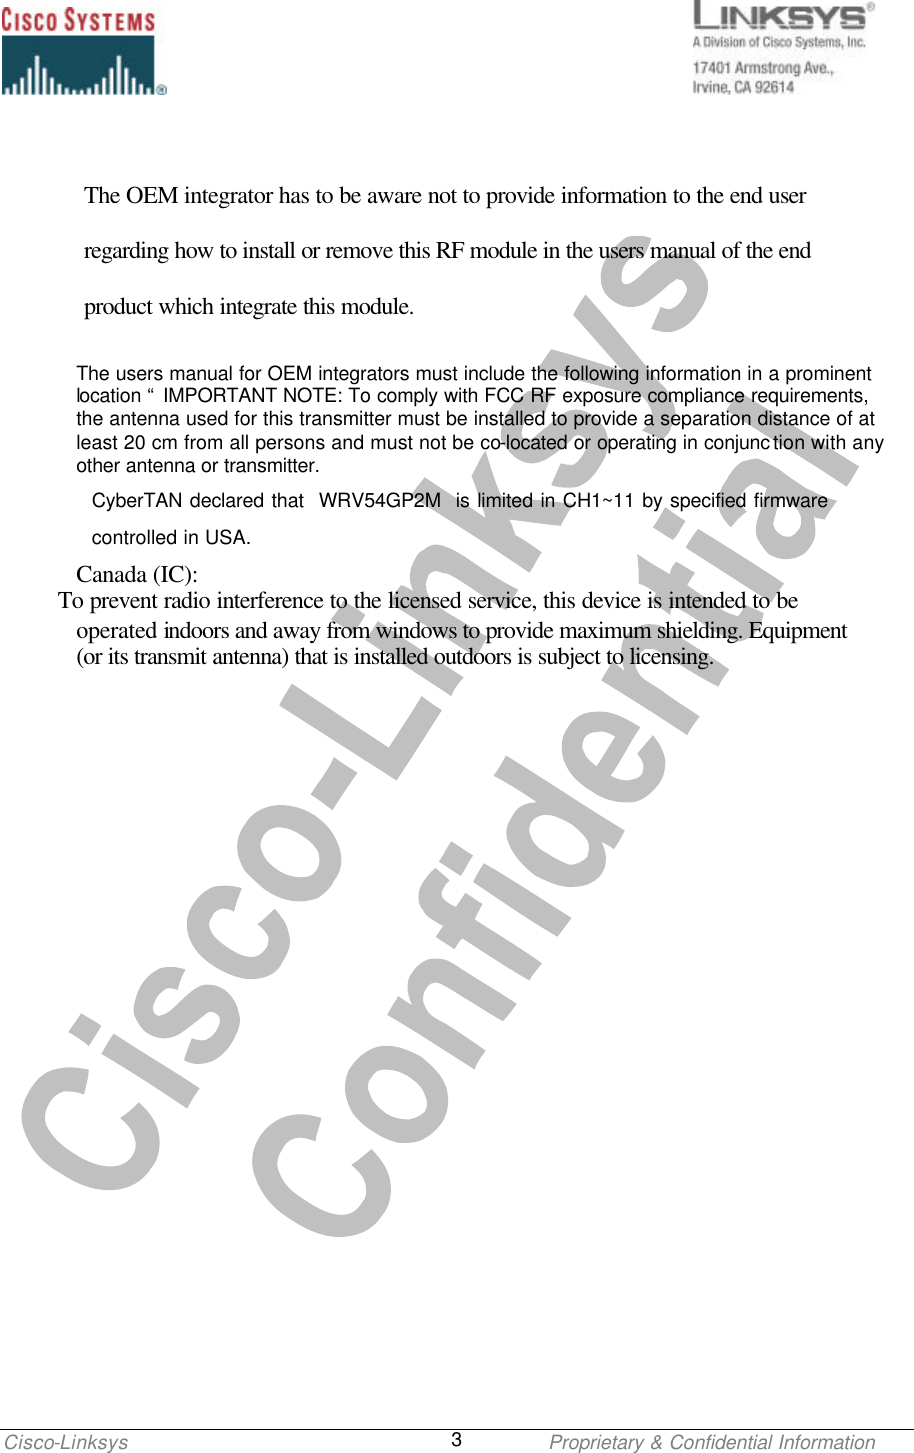    Cisco-Linksys    Proprietary &amp; Confidential Information 3  The OEM integrator has to be aware not to provide information to the end user regarding how to install or remove this RF module in the users manual of the end product which integrate this module. The users manual for OEM integrators must include the following information in a prominent location “ IMPORTANT NOTE: To comply with FCC RF exposure compliance requirements, the antenna used for this transmitter must be installed to provide a separation distance of at least 20 cm from all persons and must not be co-located or operating in conjunc tion with any other antenna or transmitter. CyberTAN declared that  WRV54GP2M  is limited in CH1~11 by specified firmware   controlled in USA. Canada (IC):        To prevent radio interference to the licensed service, this device is intended to be operated indoors and away from windows to provide maximum shielding. Equipment (or its transmit antenna) that is installed outdoors is subject to licensing.  